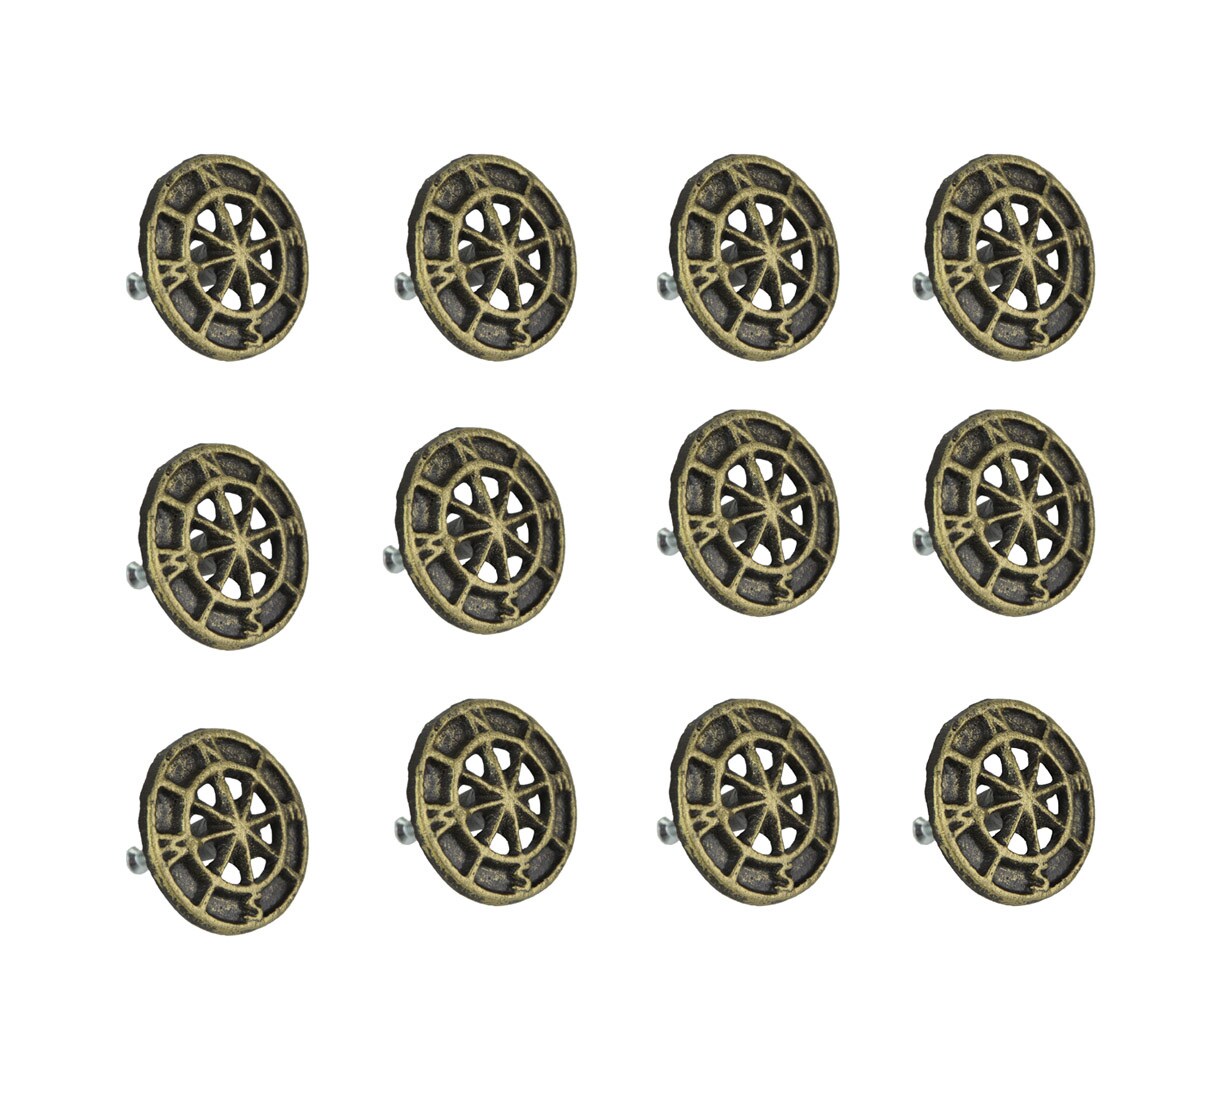 Set of 12 Cast Iron Nautical Compass Rose Cabinet Hardware Knobs Drawer Pulls